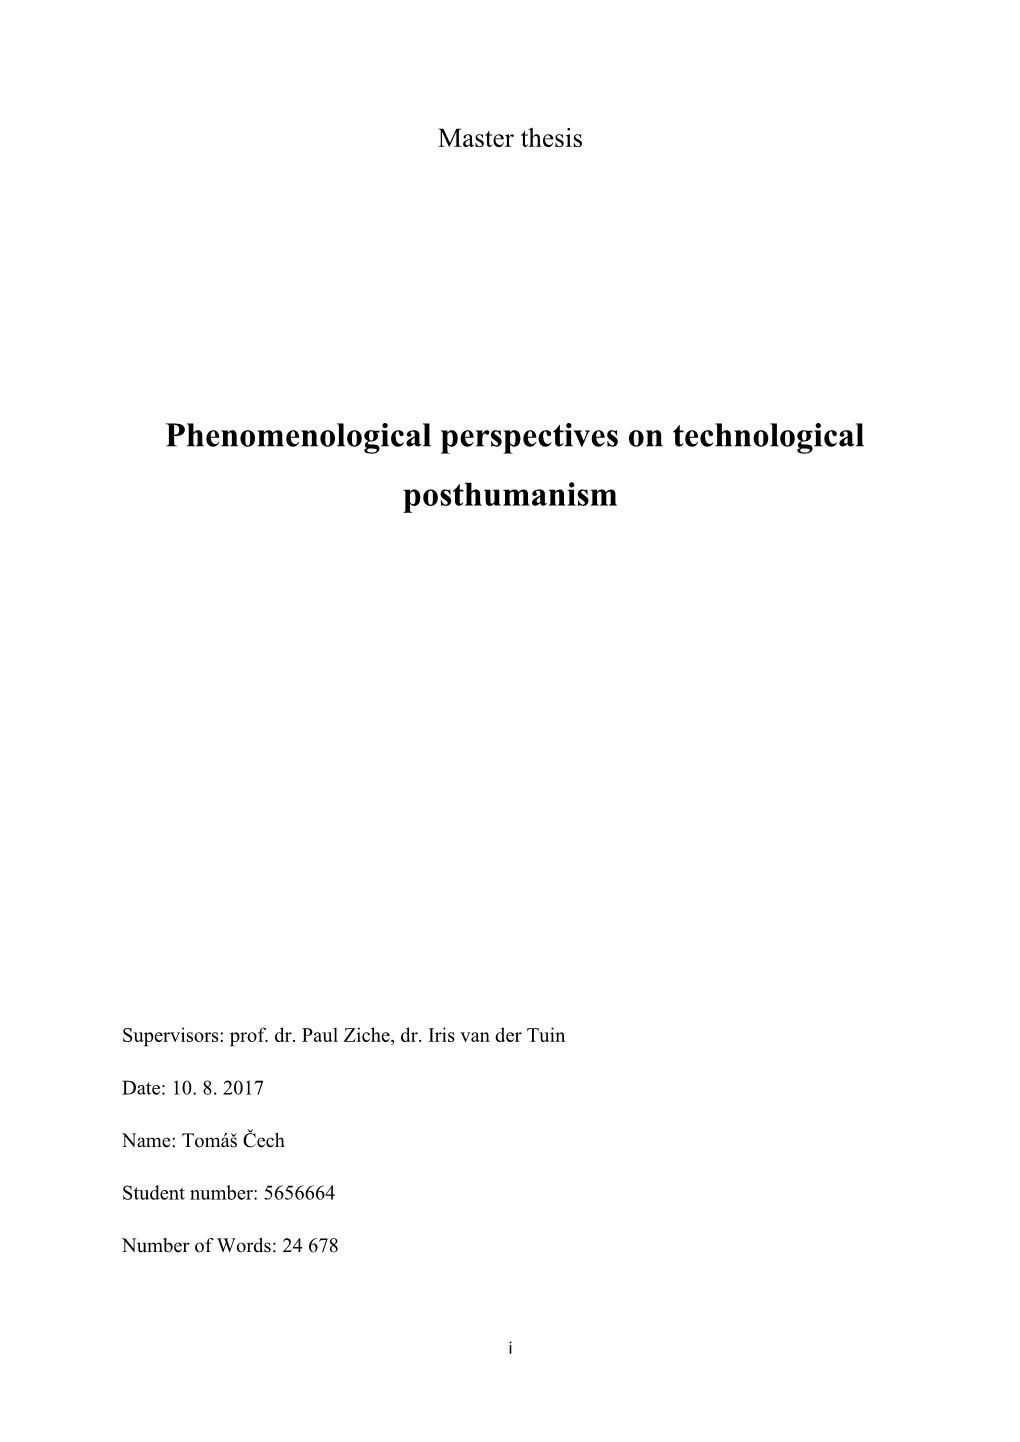 Phenomenological Perspectives on Technological Posthumanism